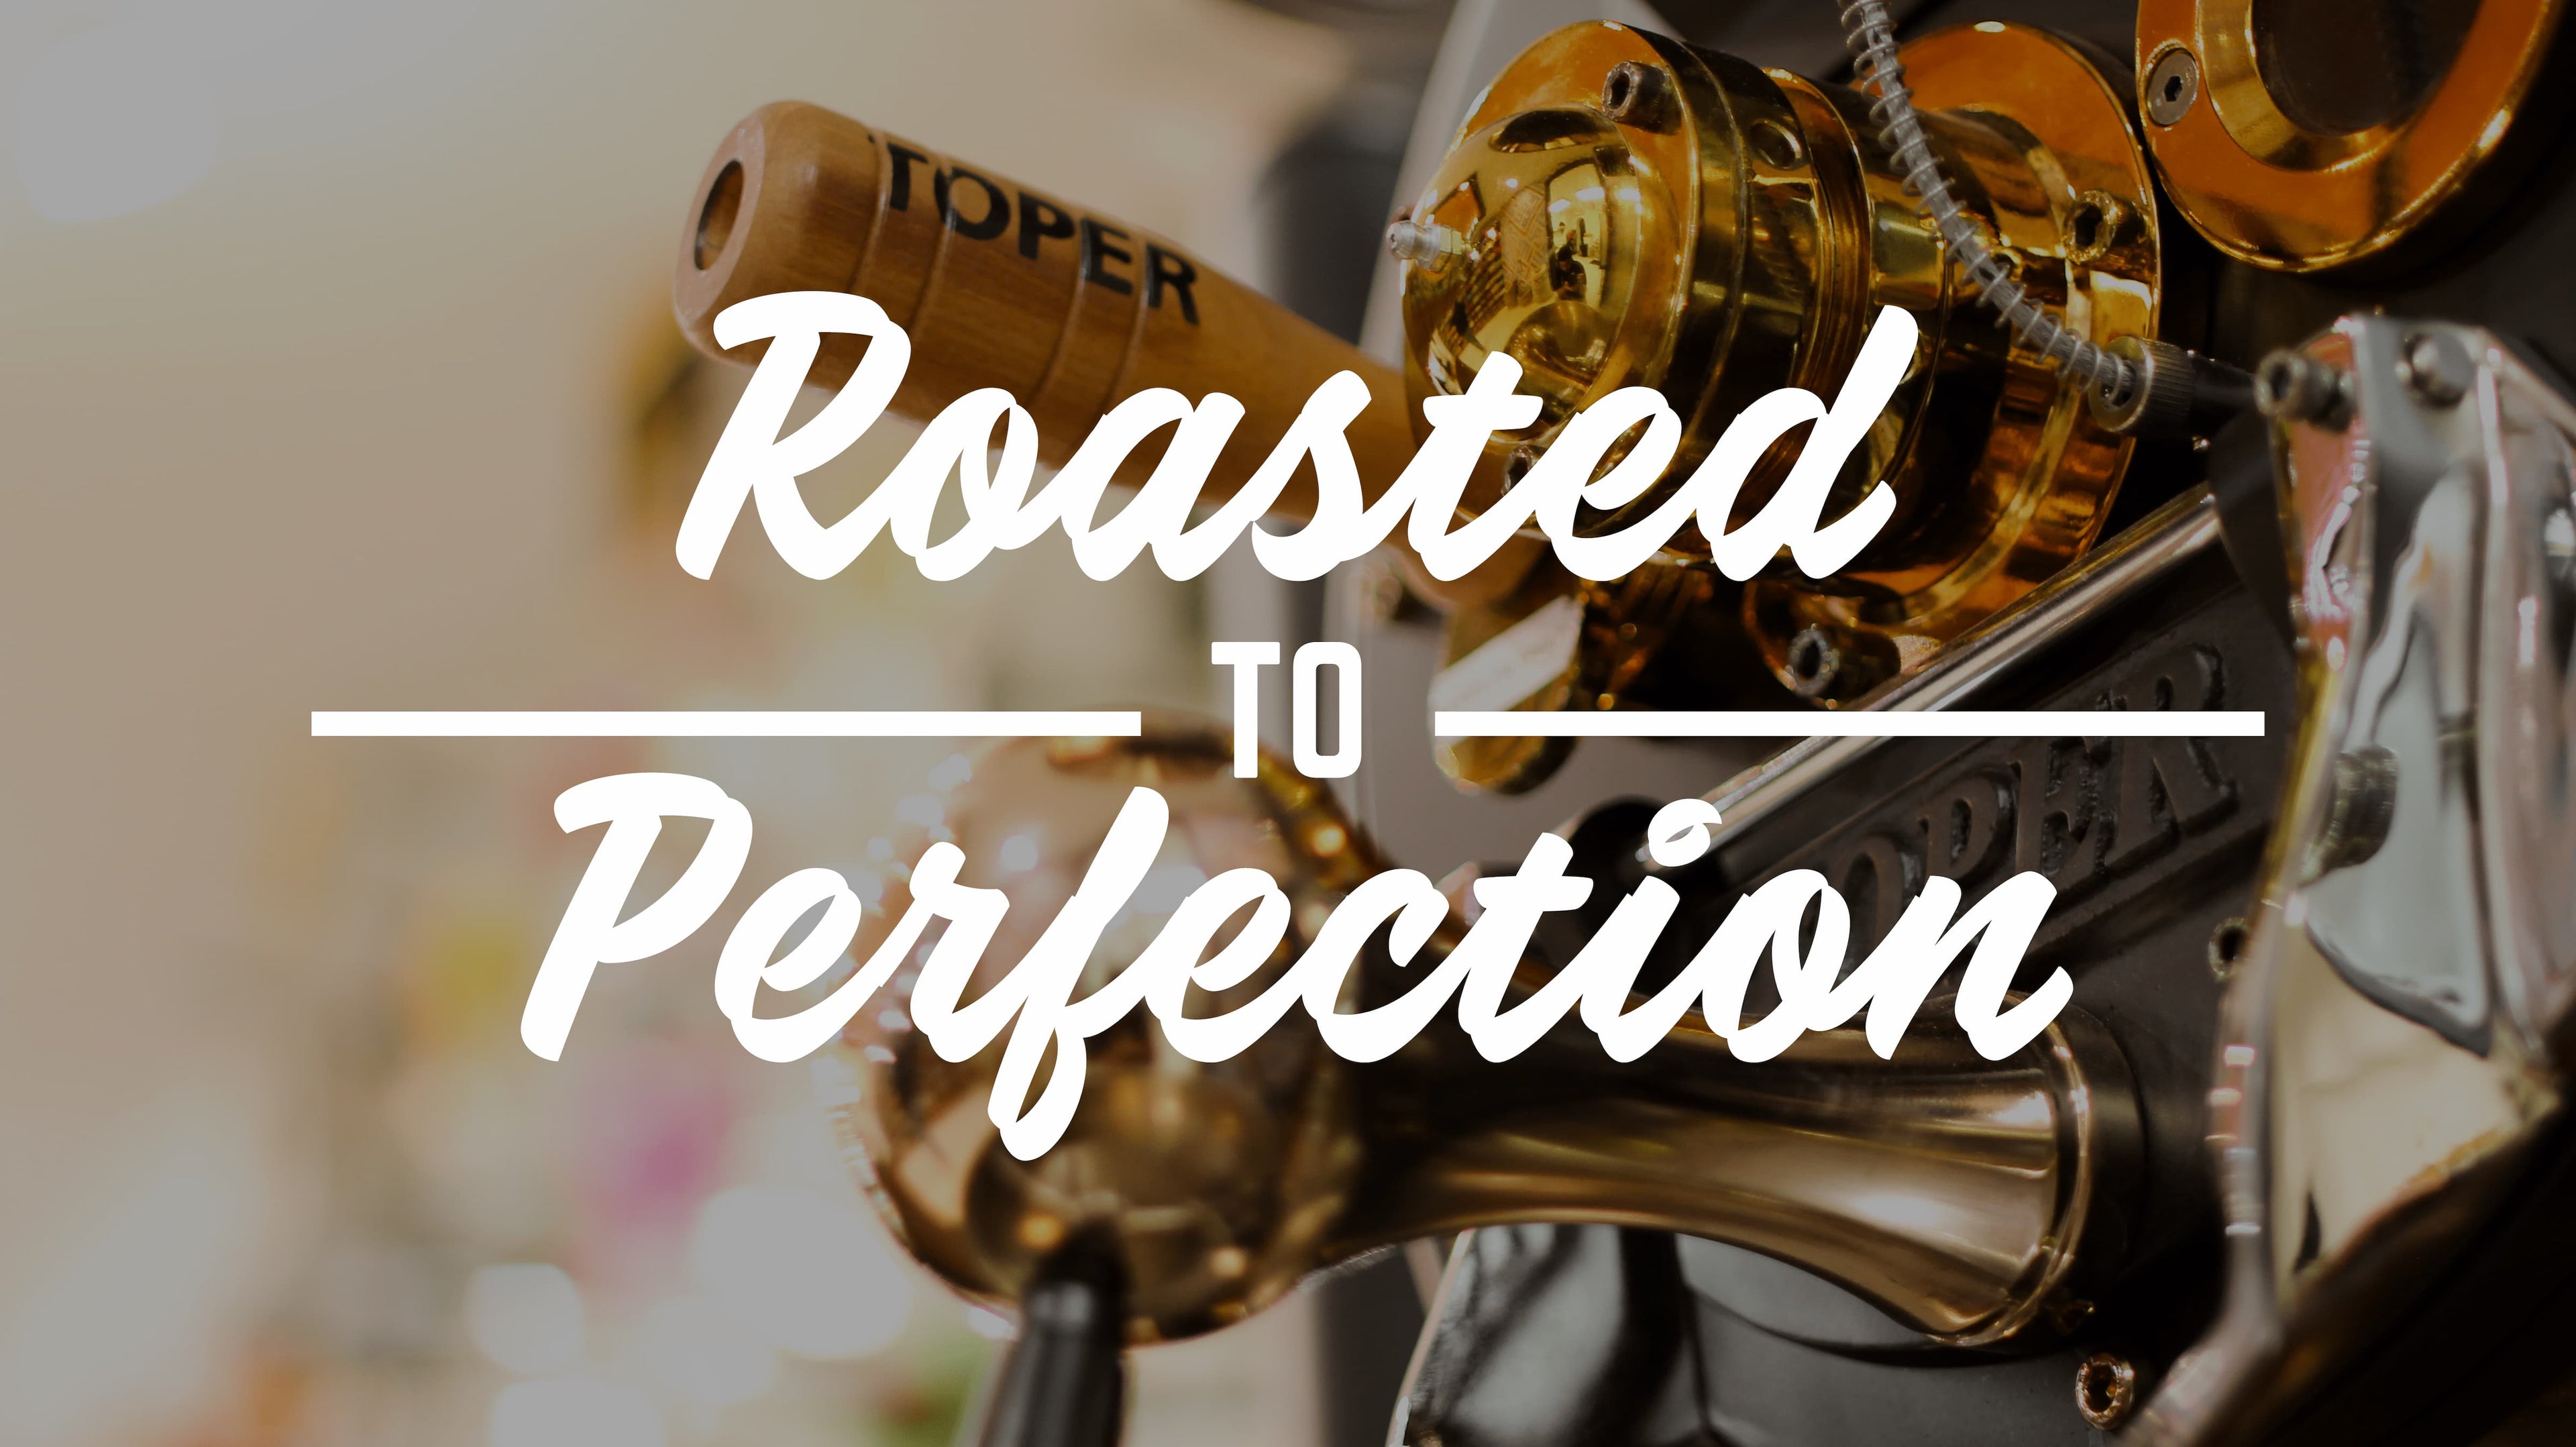 Roasted To Perfection using State of The Art Equipment We only use the best of the best machinery and equipment to get that perfect roast for your favorite hot cup of coffee and to achieve a delicious crunch for all your nut snacking needs.